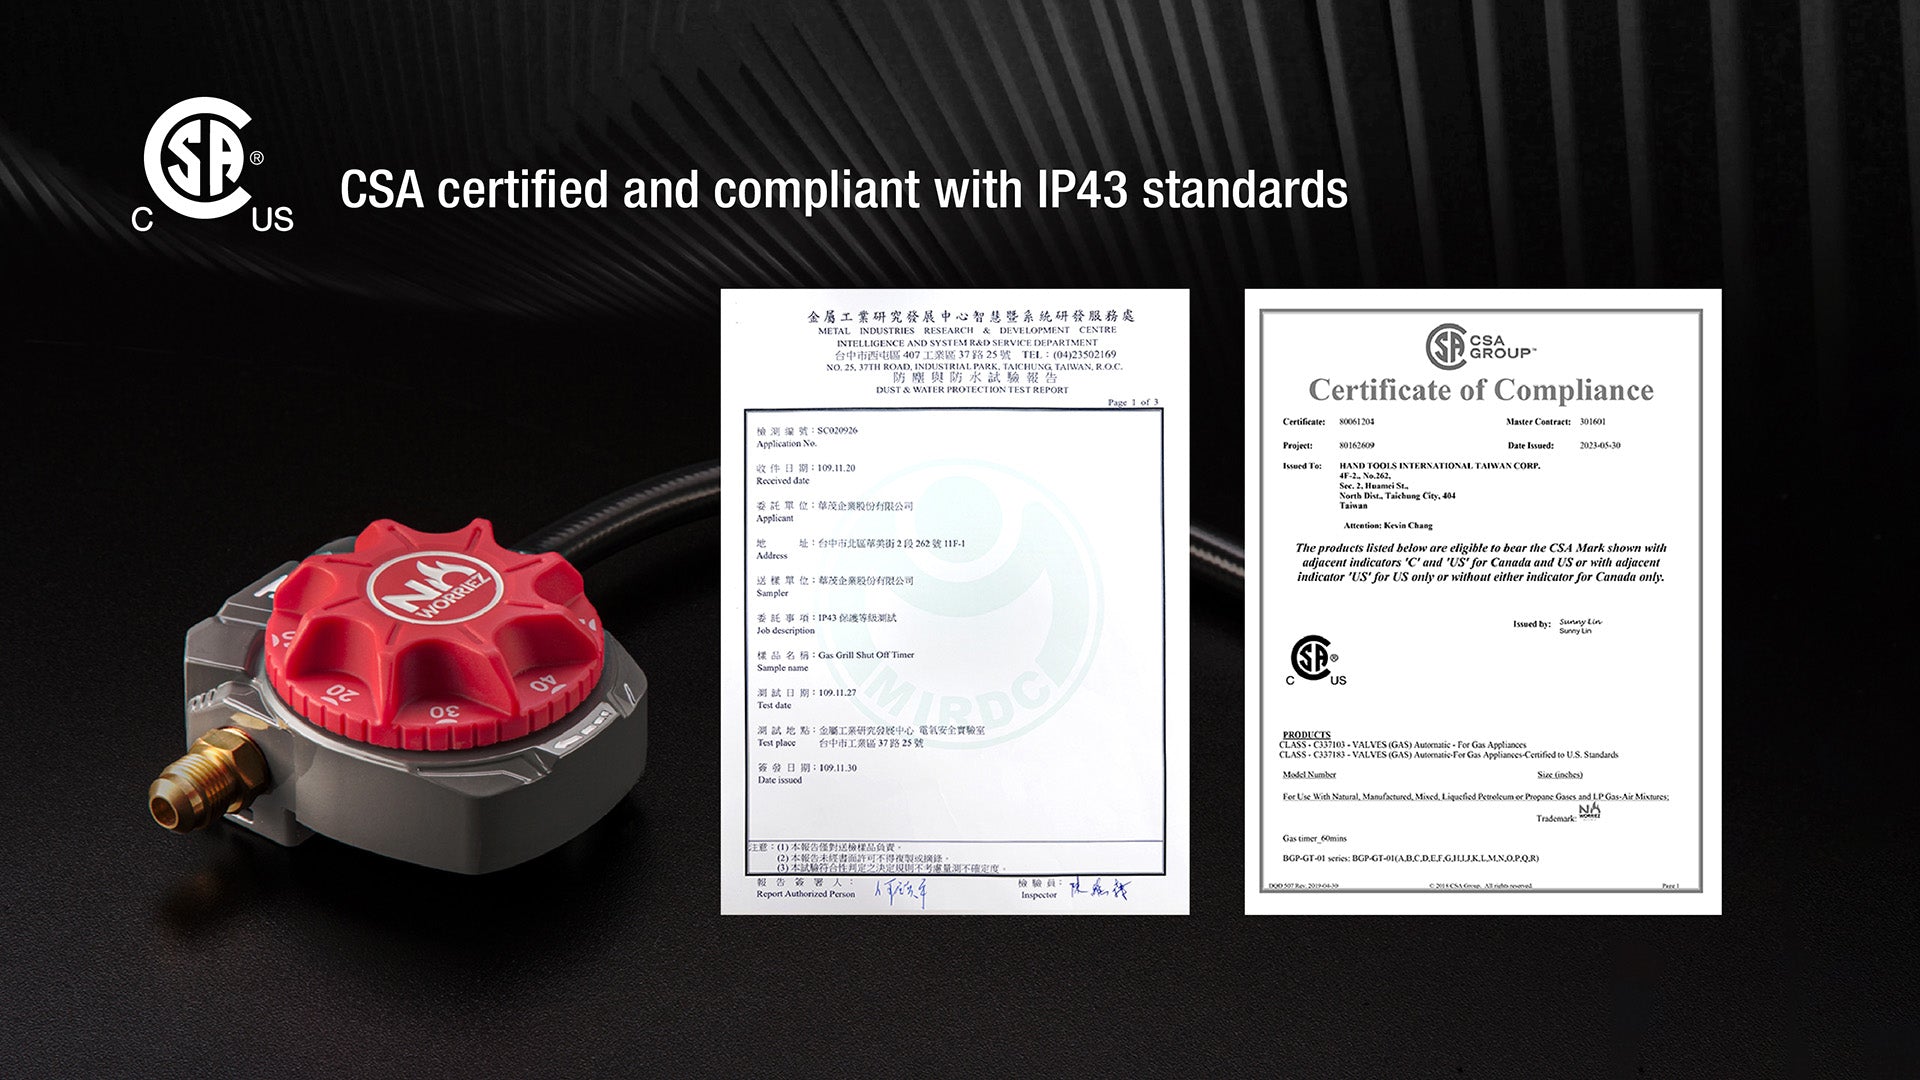 No Worriez gas timer is CSA certified and compliant with IP43 standards